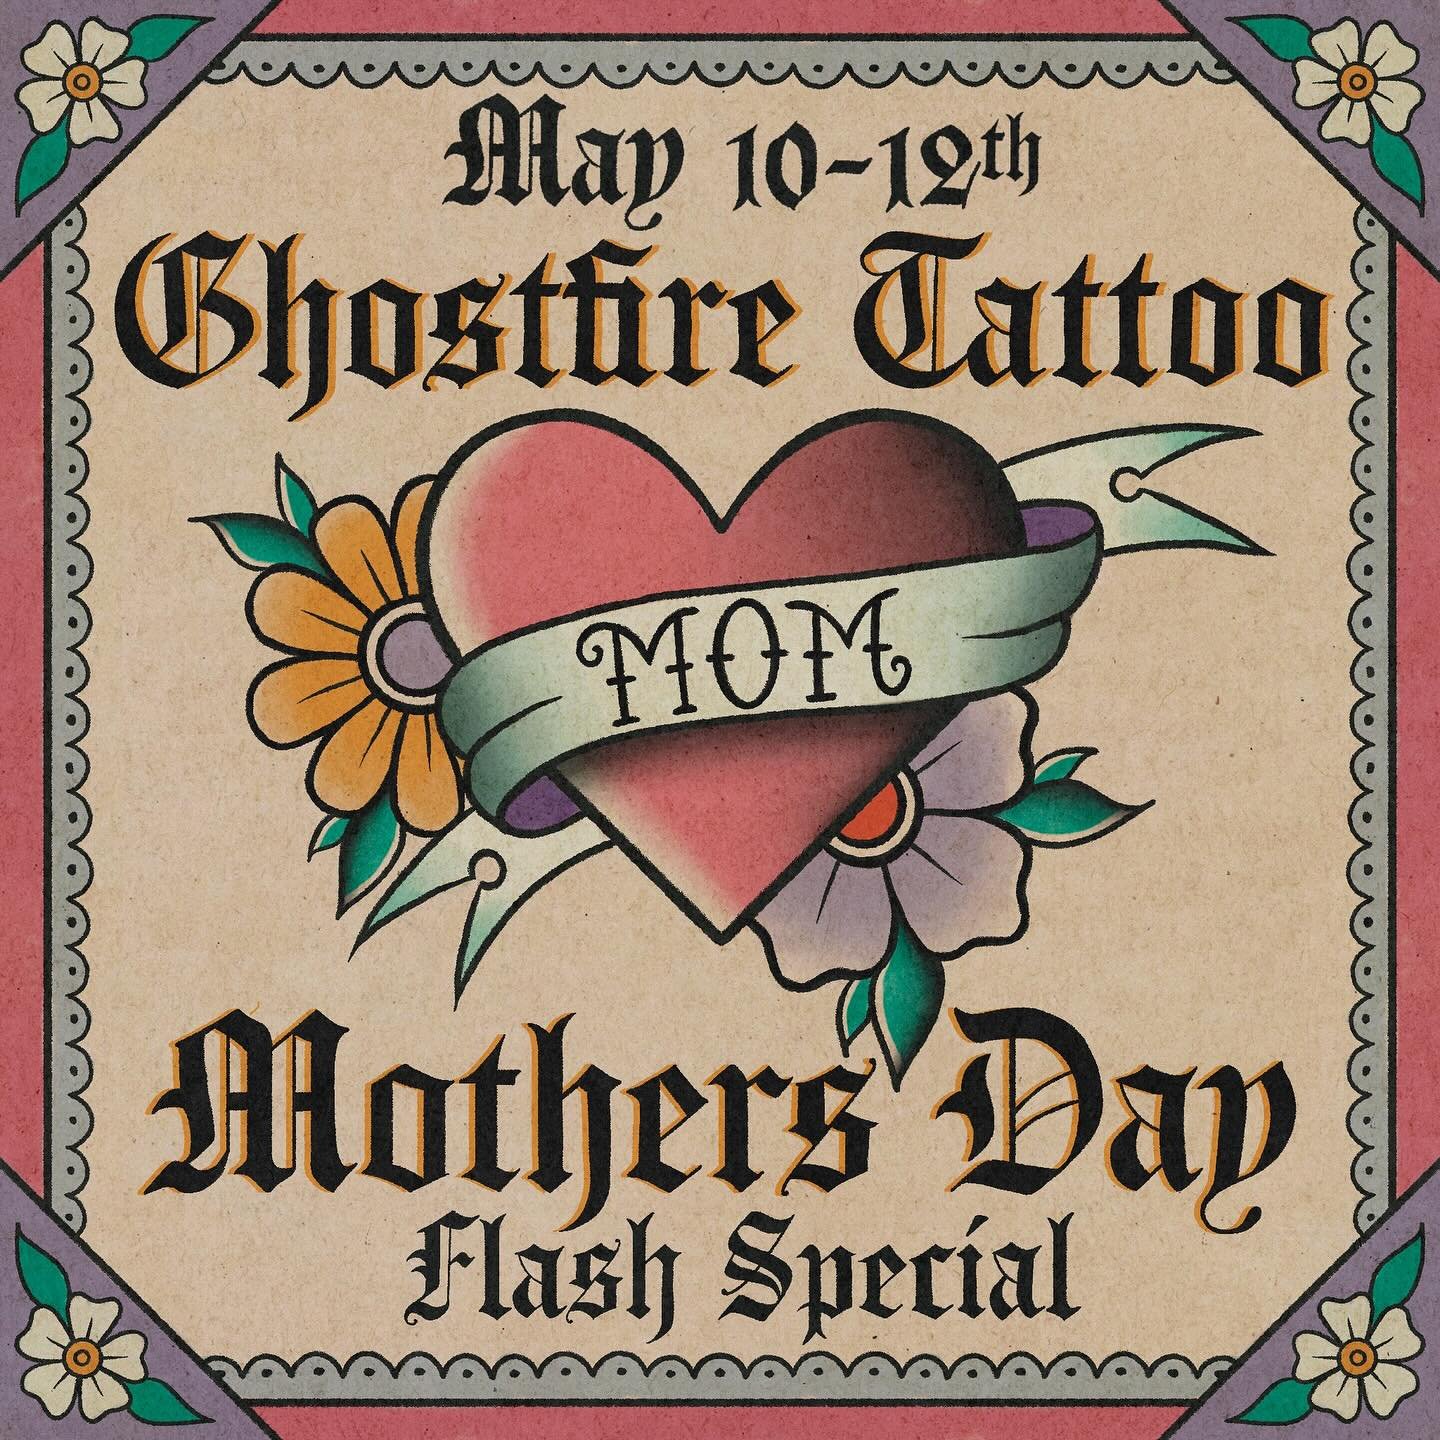 Show your mom how much you love her and swing by Ghostfire this Mother&rsquo;s Day for our flash special 💕 We&rsquo;ll have special rates on our Mother&rsquo;s Day flash designs all weekend!